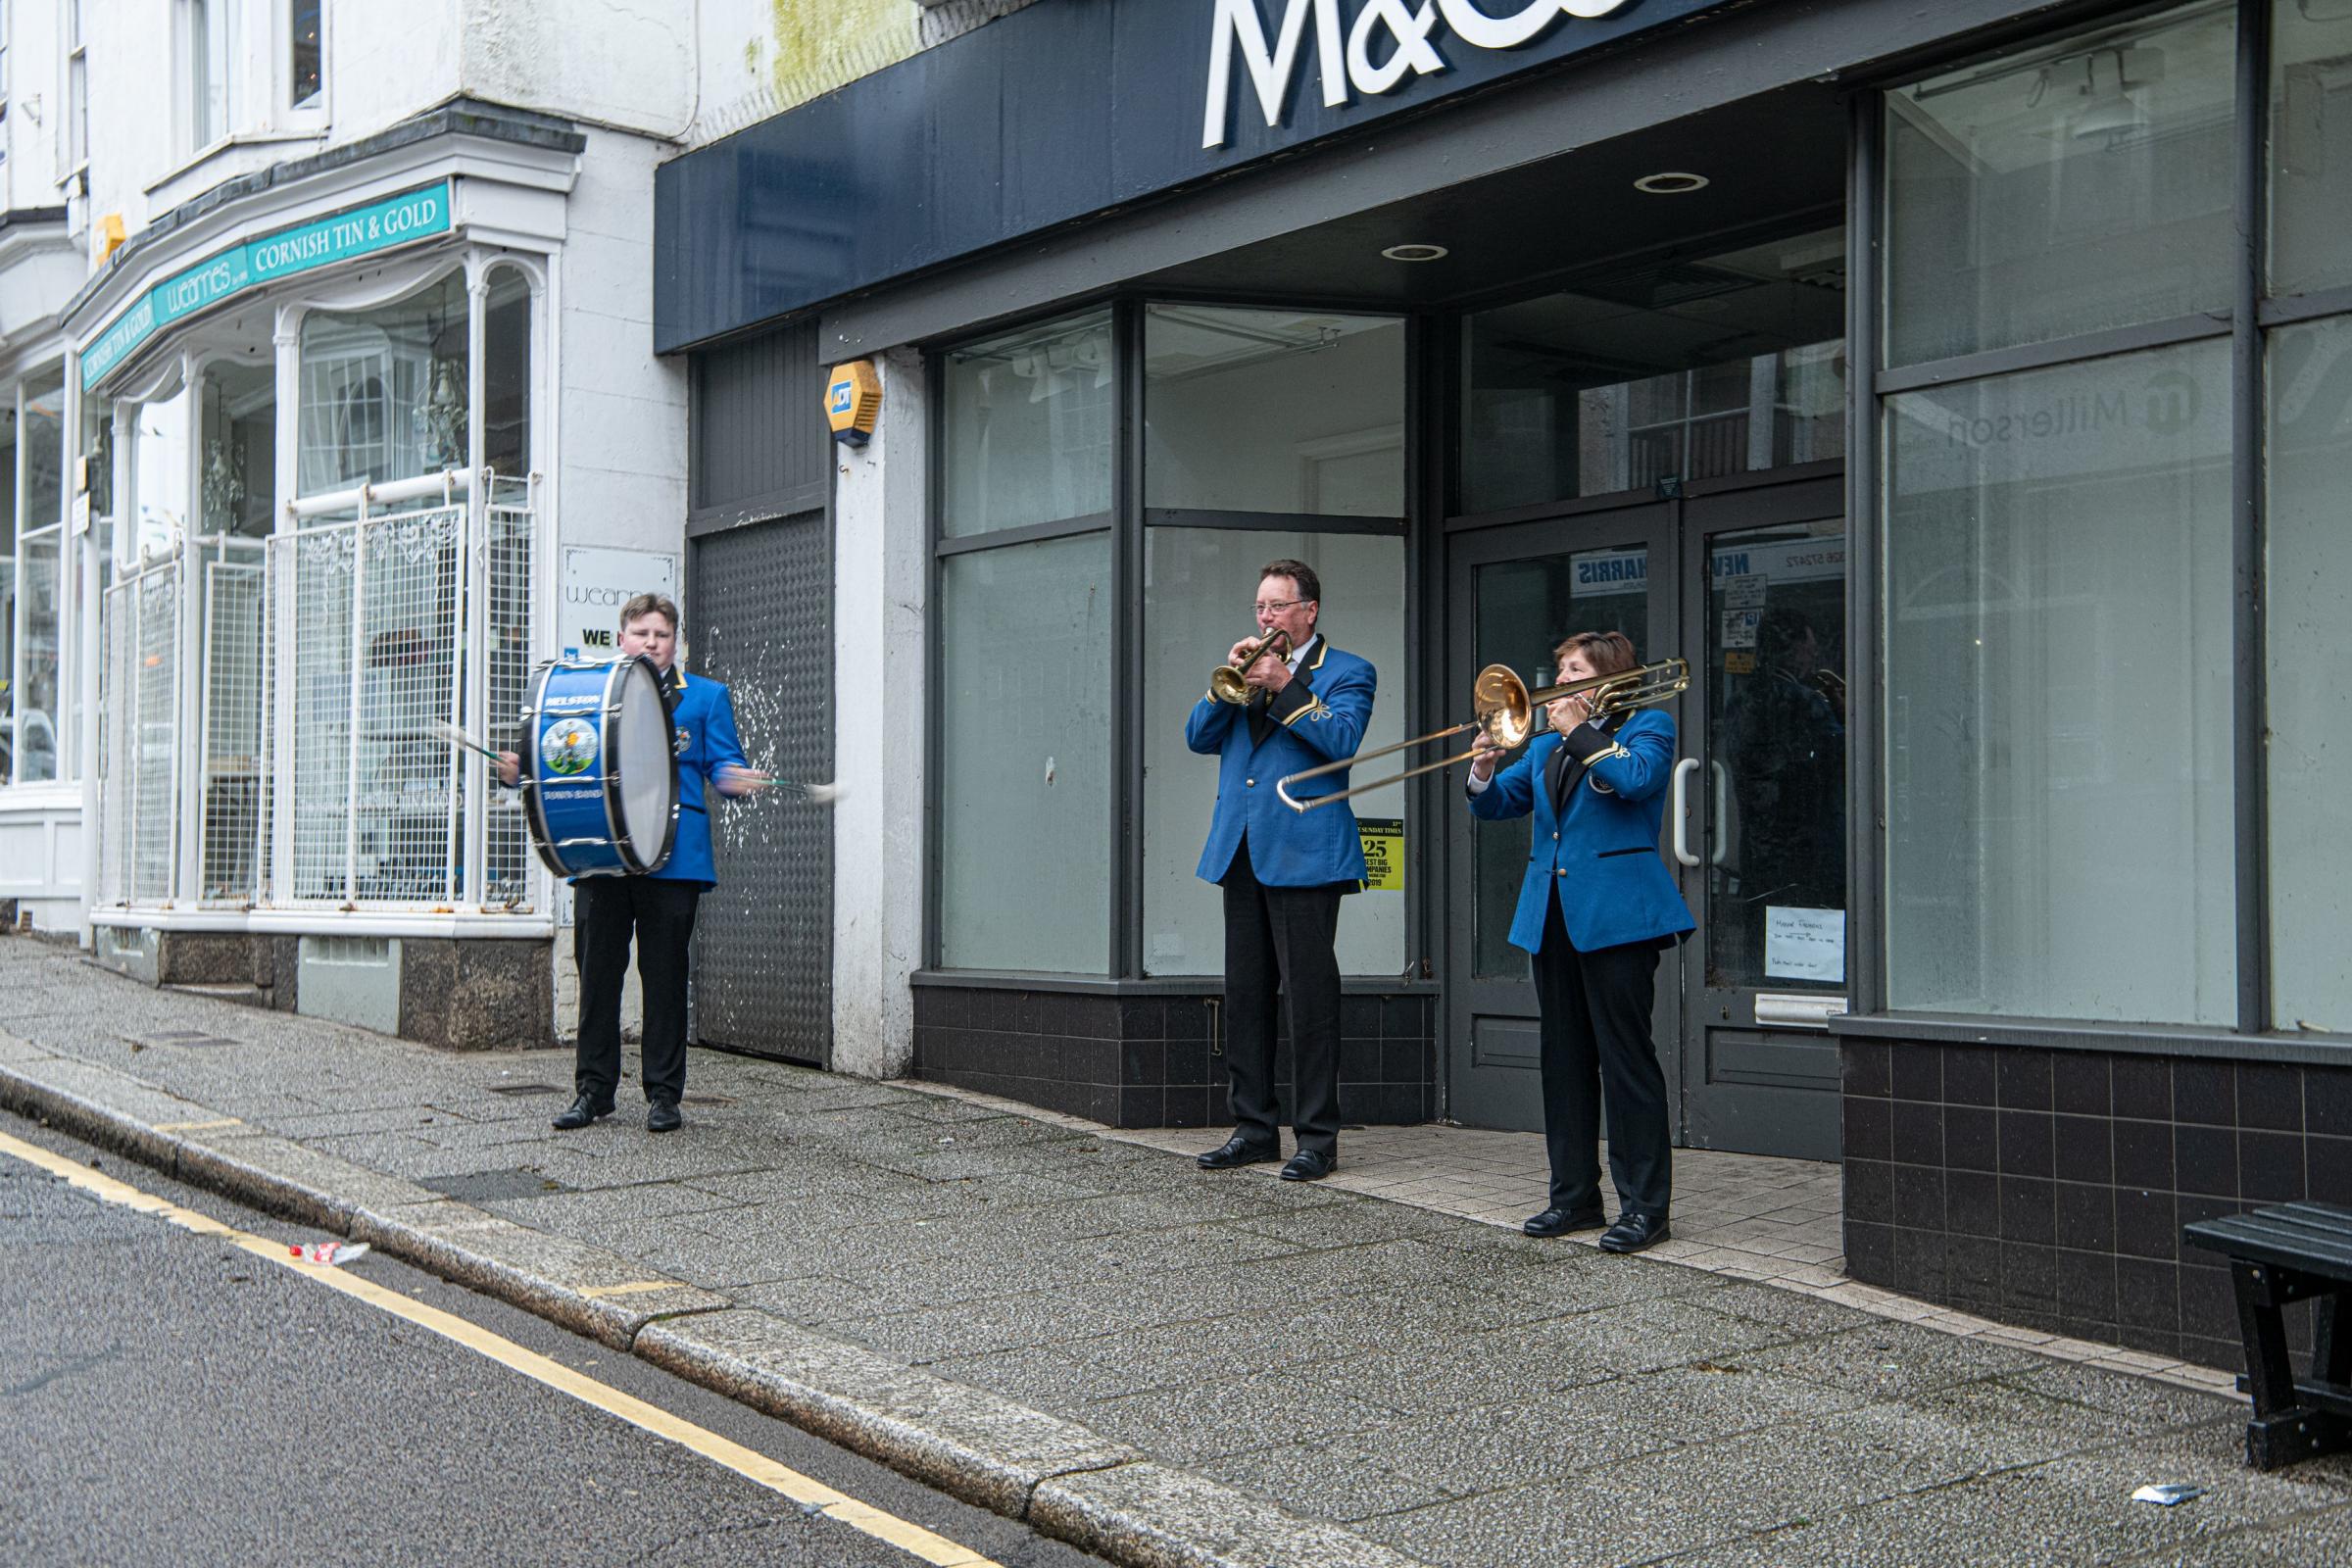 Helston Town Band members Ben, David and Ann playing at 7am. Picture: Kathy White